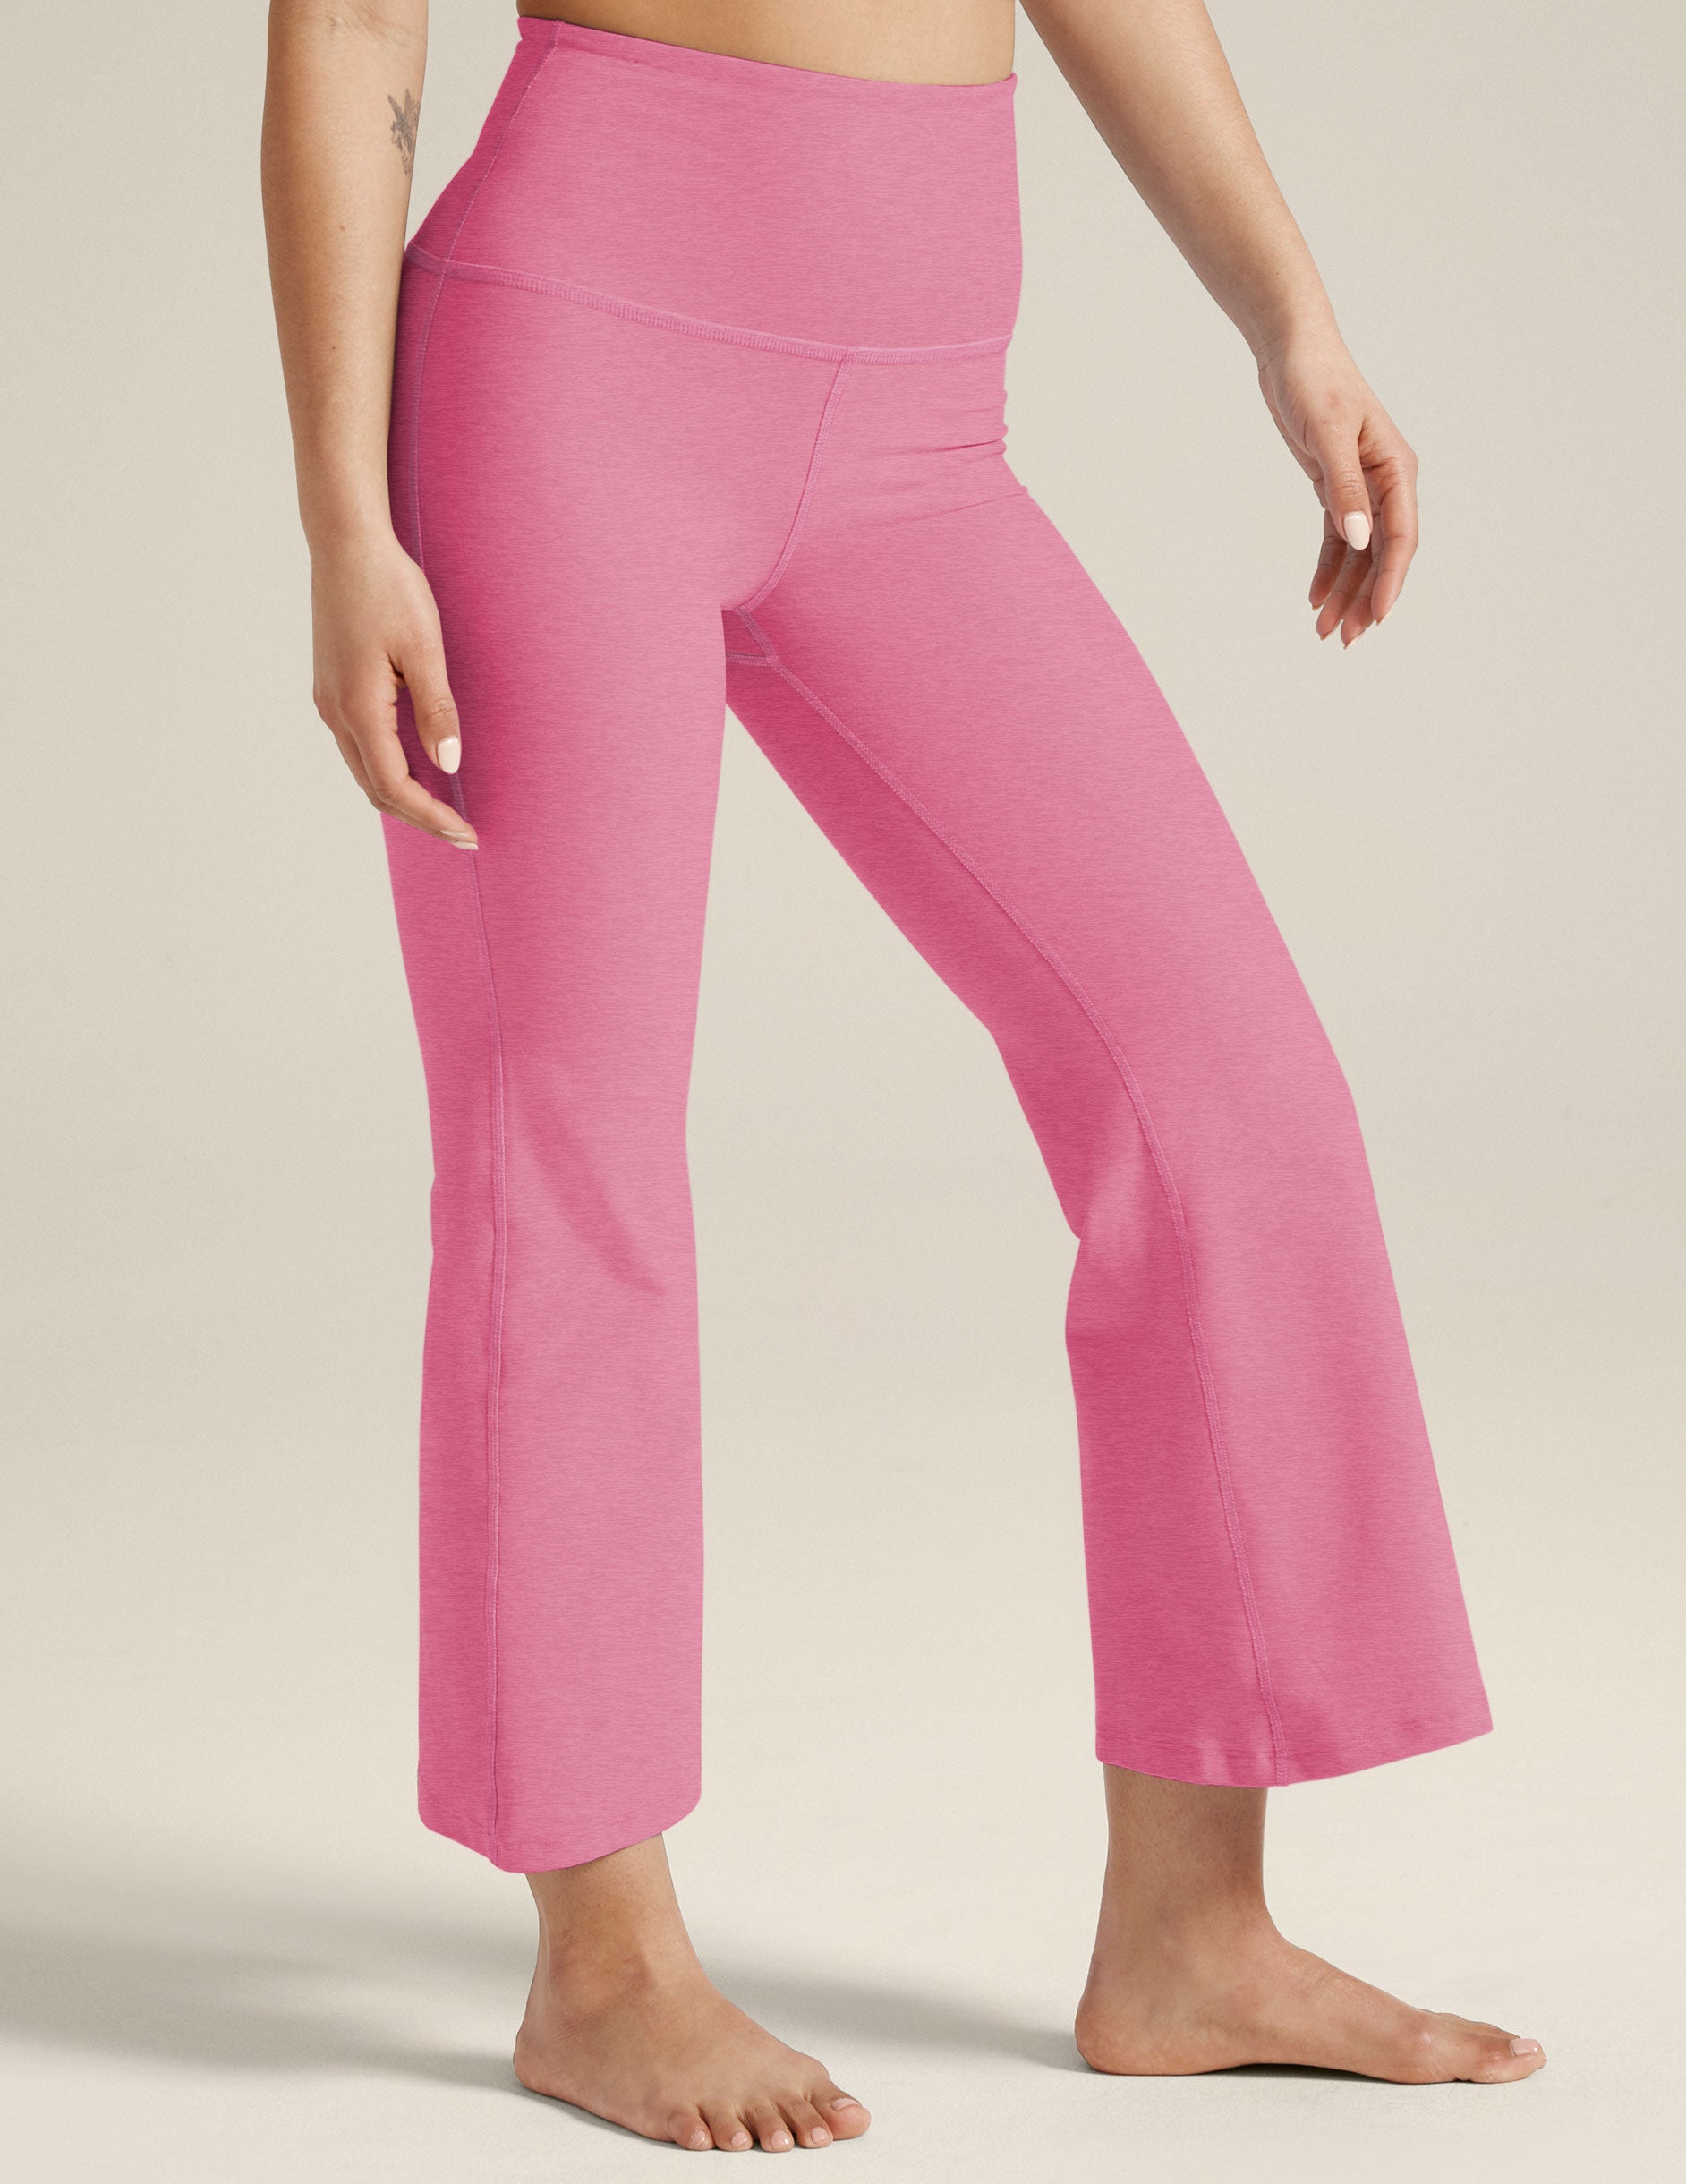 model is wearing pink high-waisted high-rise pants. 